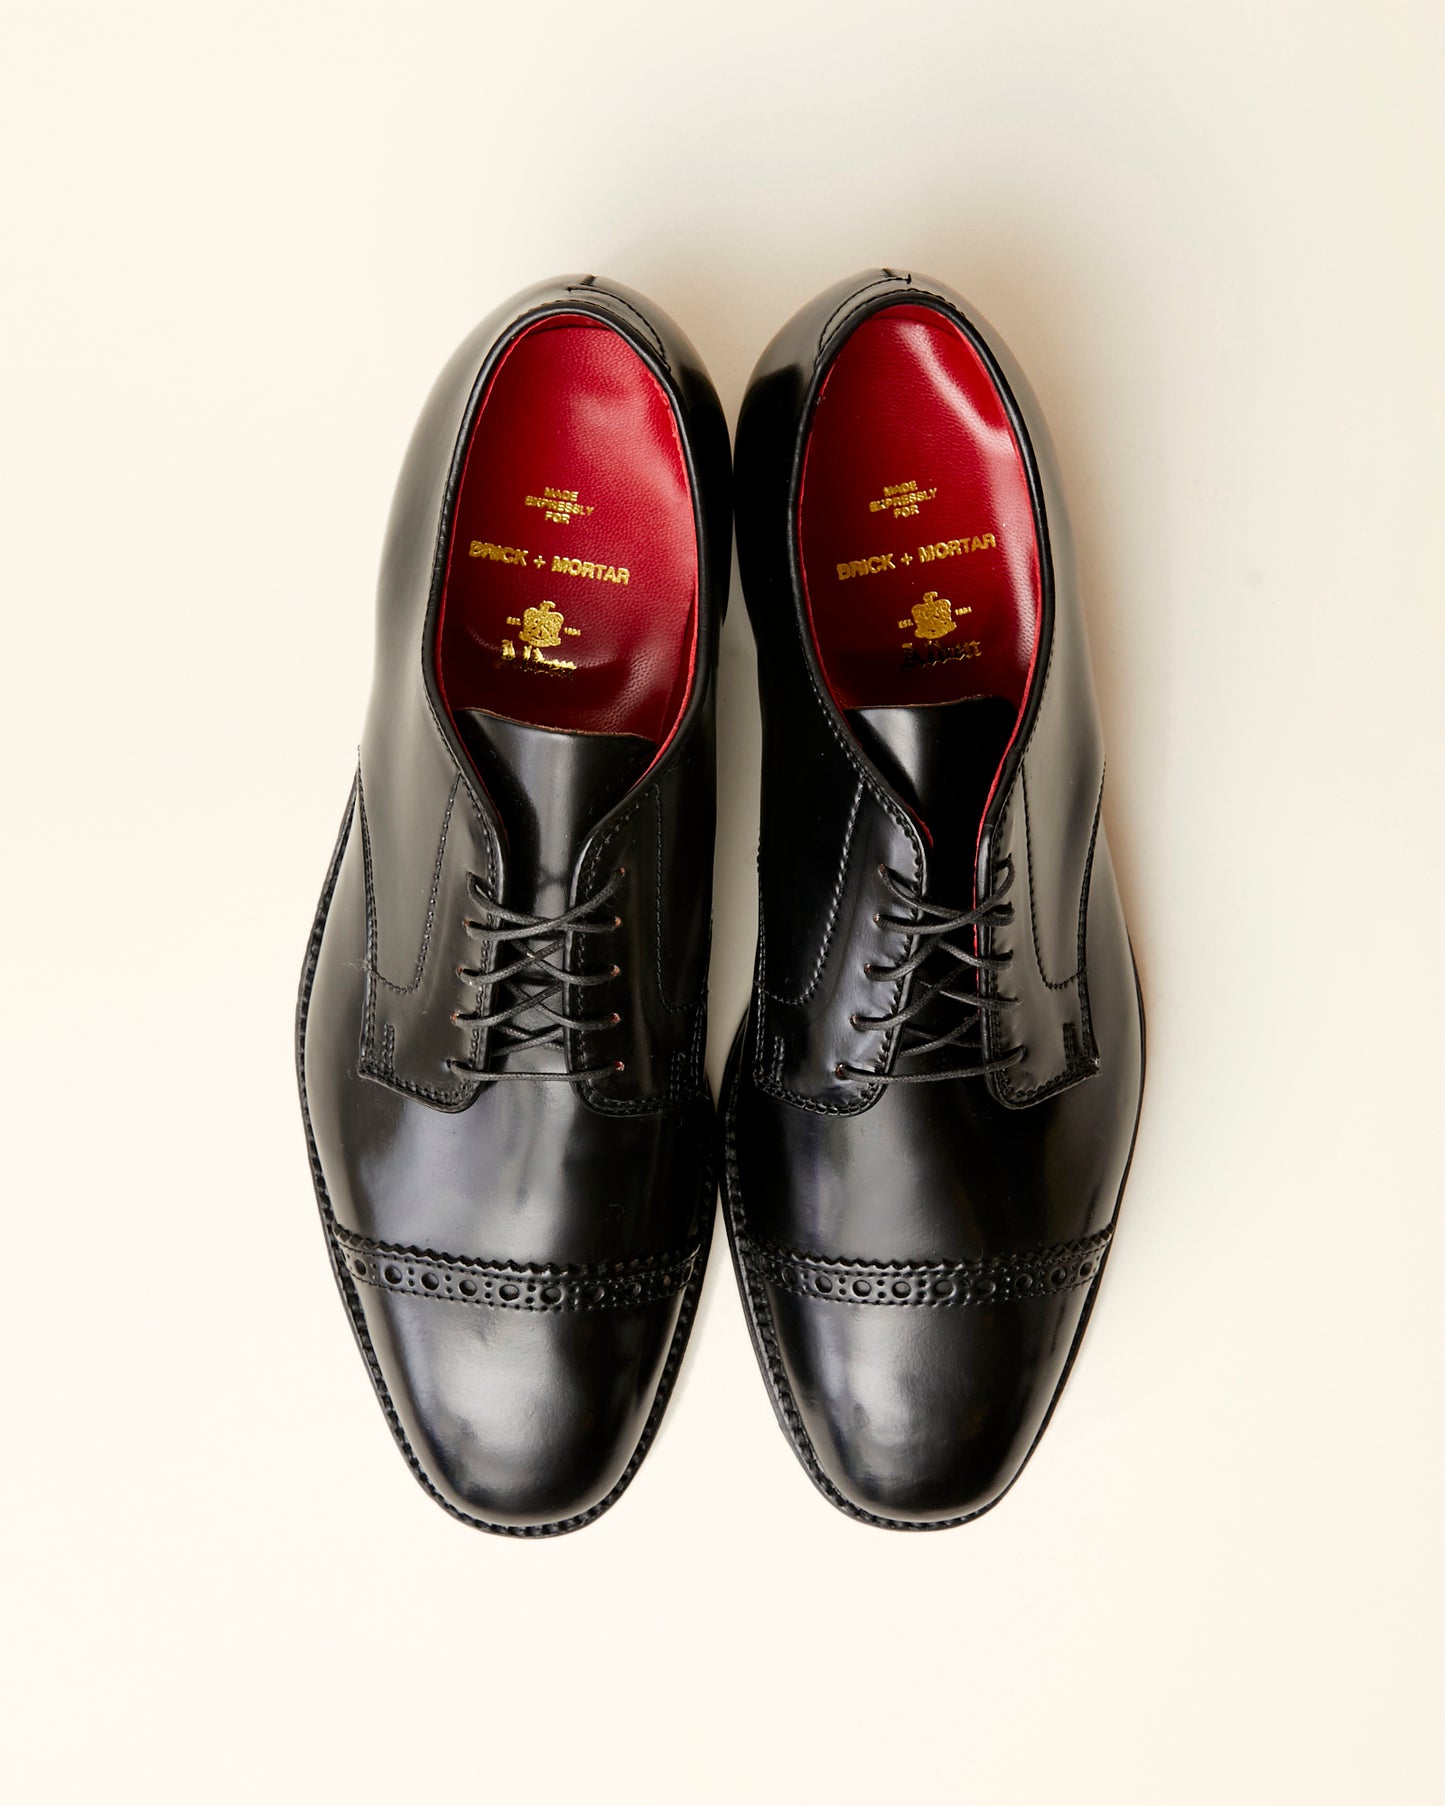 "Executive" Black Shell Cordovan Unlined Perforated Straight Tip Blucher